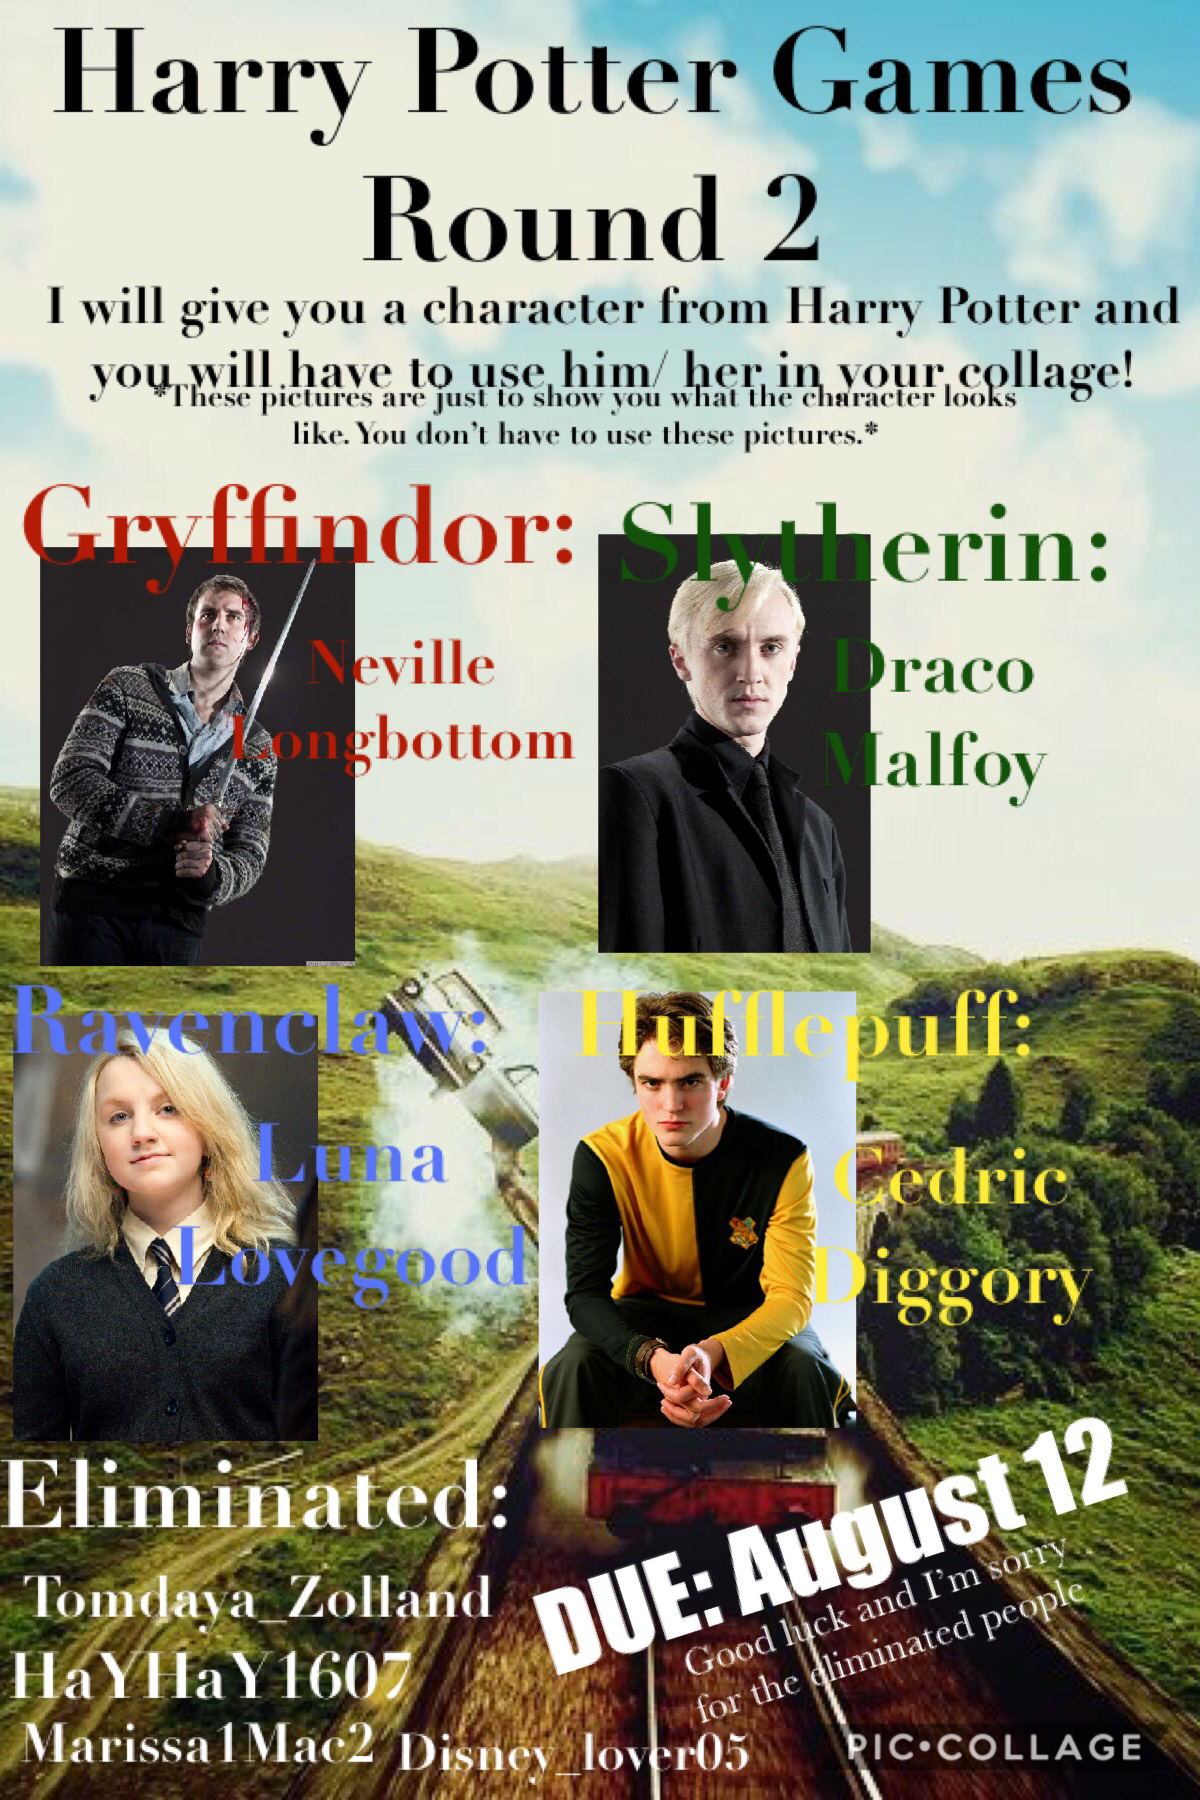 Harry Potter Round 2 & Results. Due August 12, 2019. 